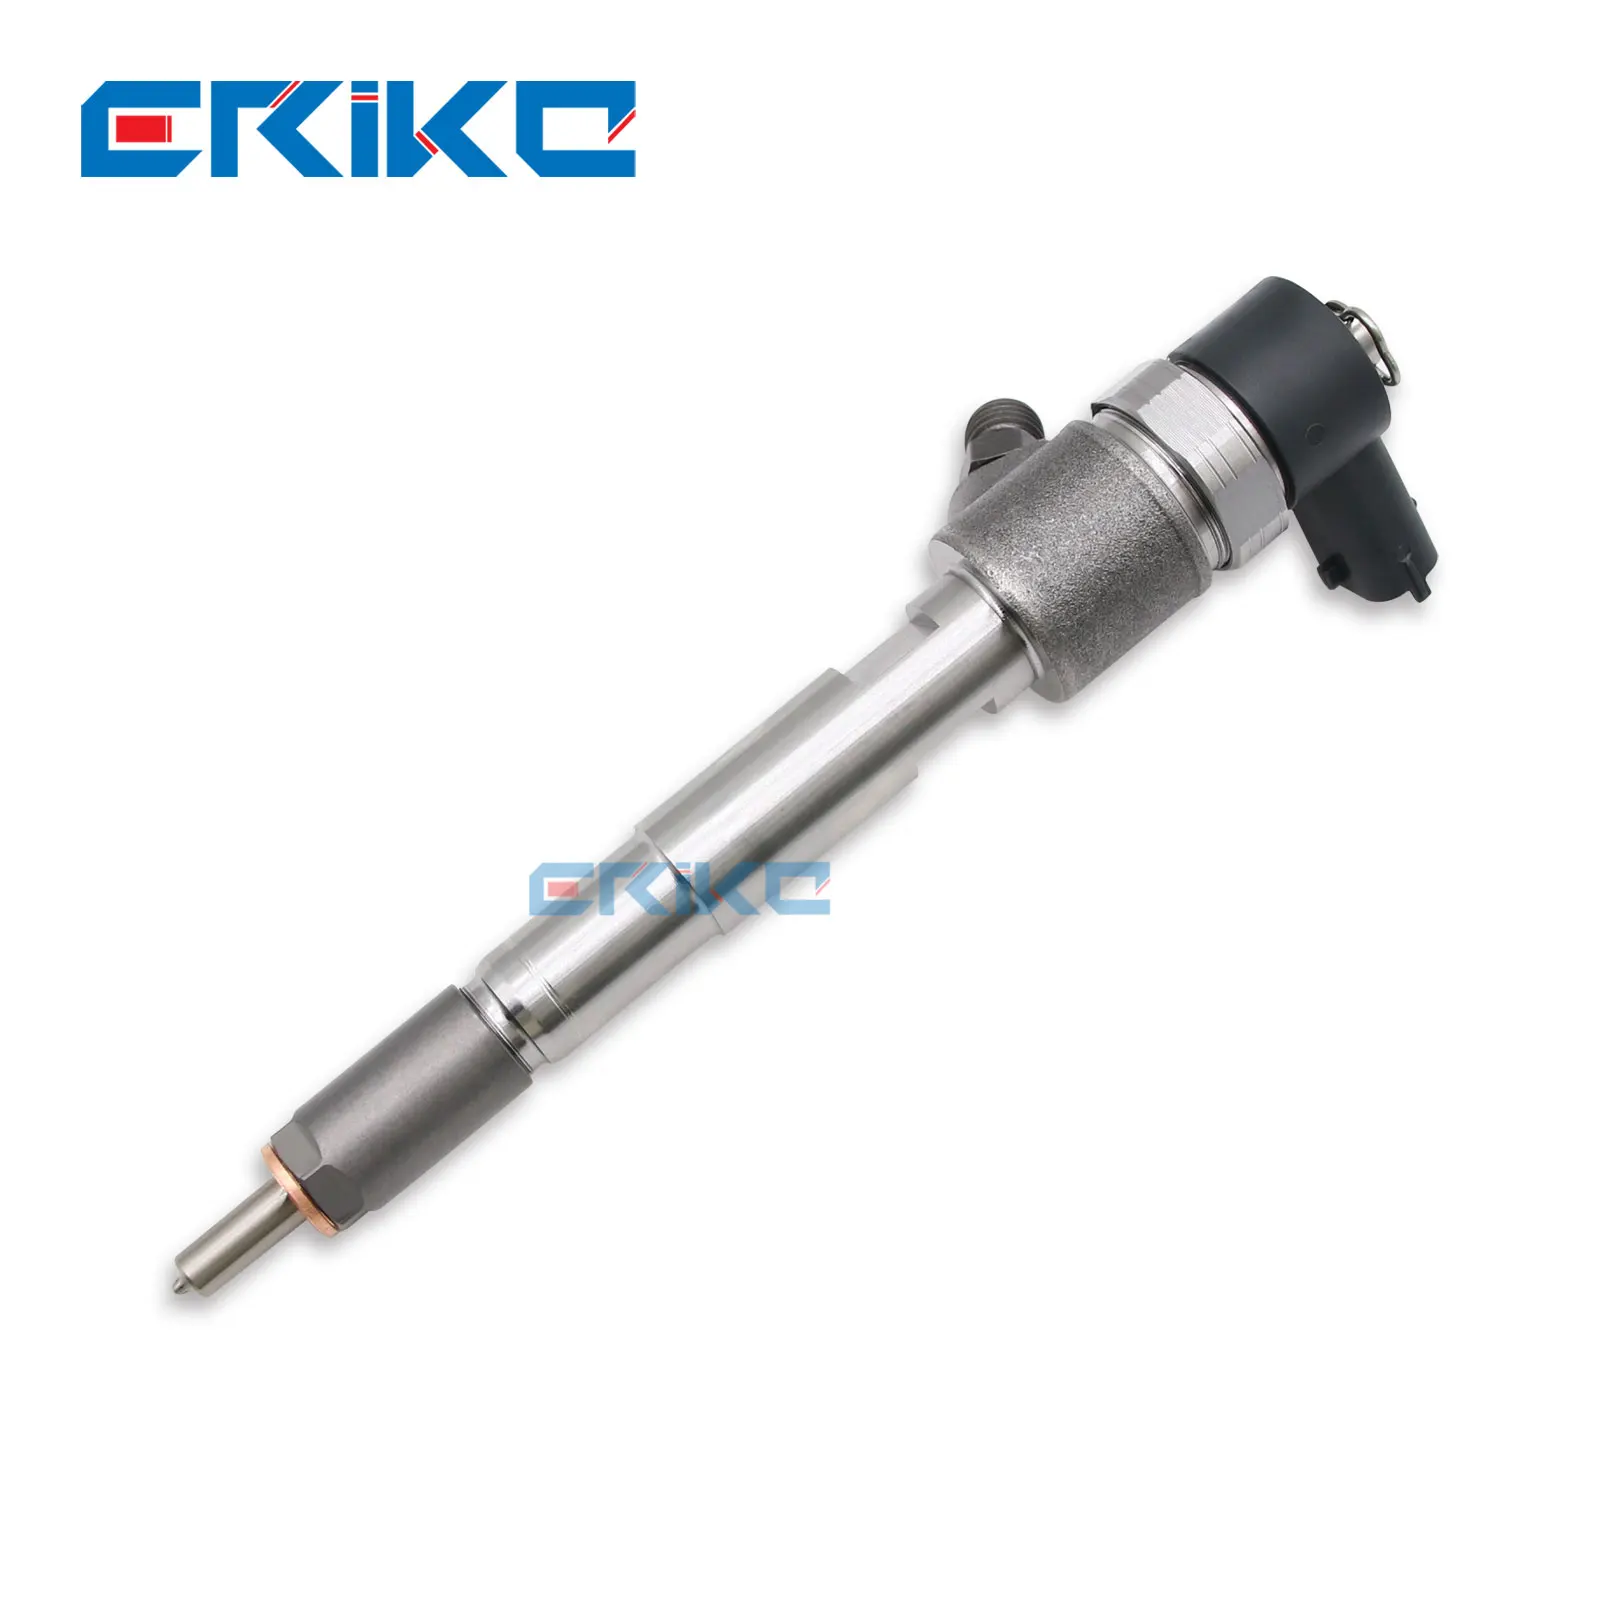 

0445110702 Diesel Engine Parts Nozzle 0 445 110 702 Fuel injector CRDI injector Auto Engine Injection 0445 110 702 for Bosch